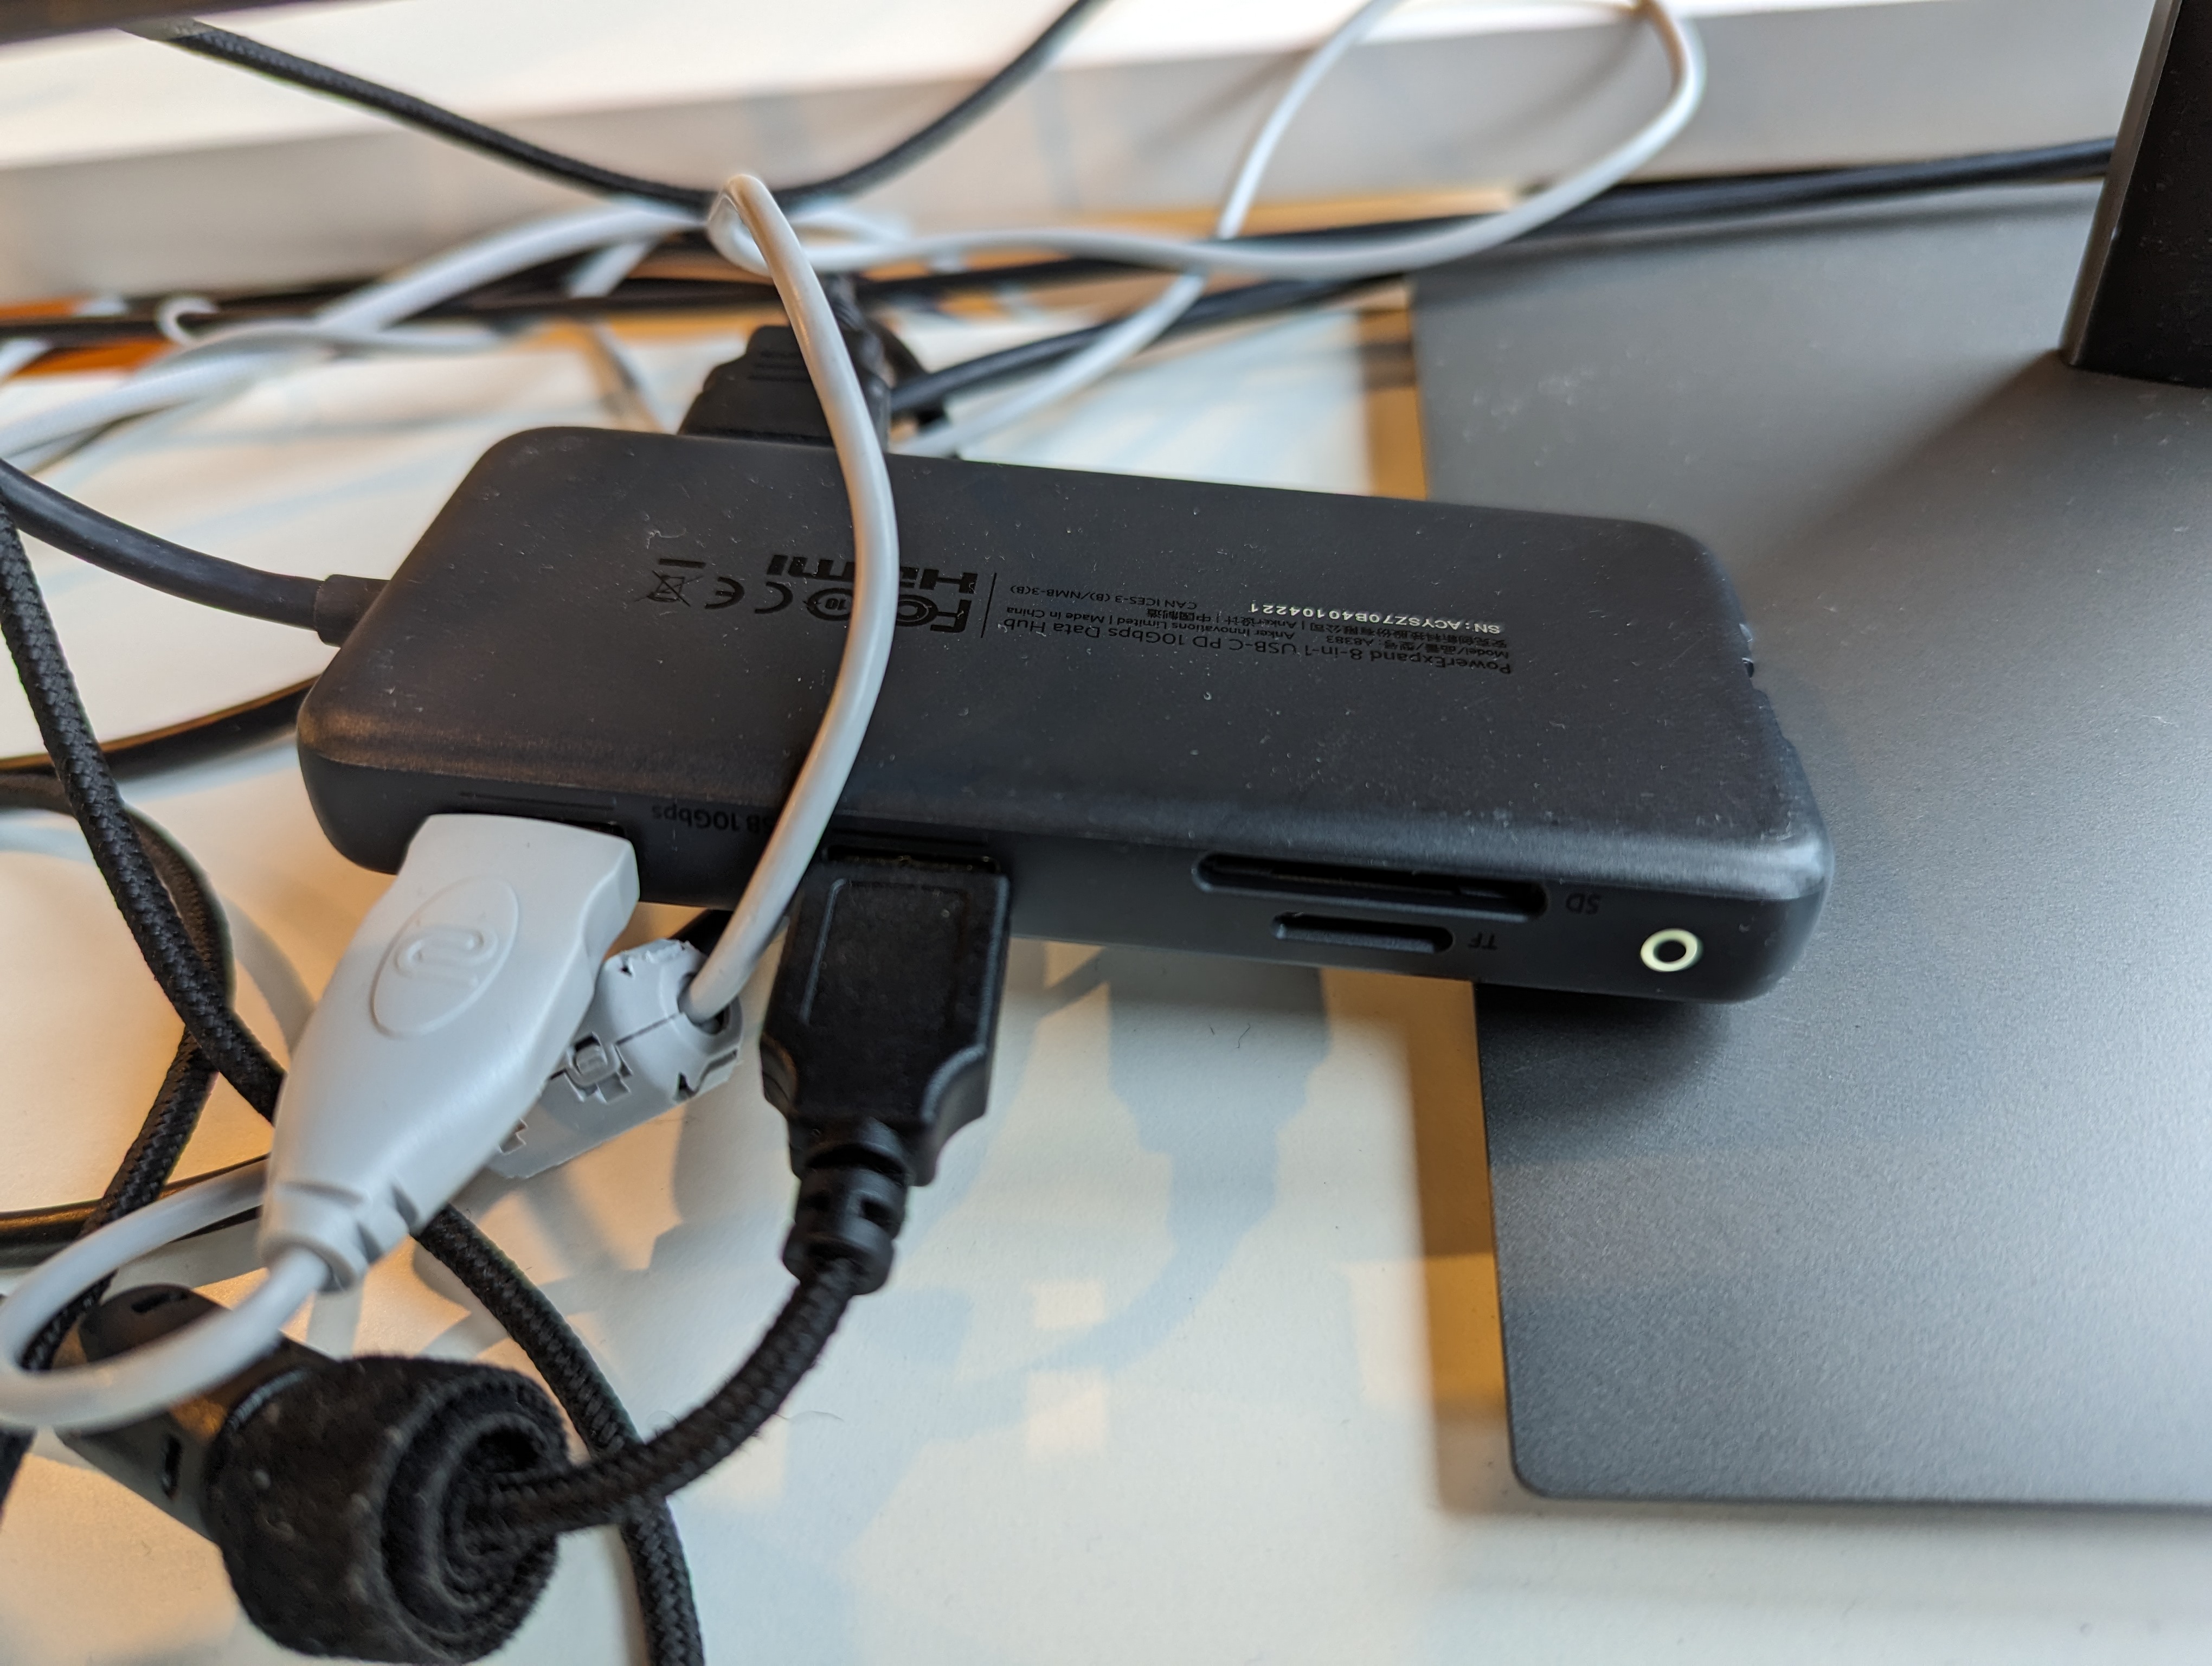 A photograph of an Anker USB hub with two USB-A cables plugged into it in the front as well as an HDMI cable plugged into it in the back.  It has a circular white light on the front right which is illuminated.